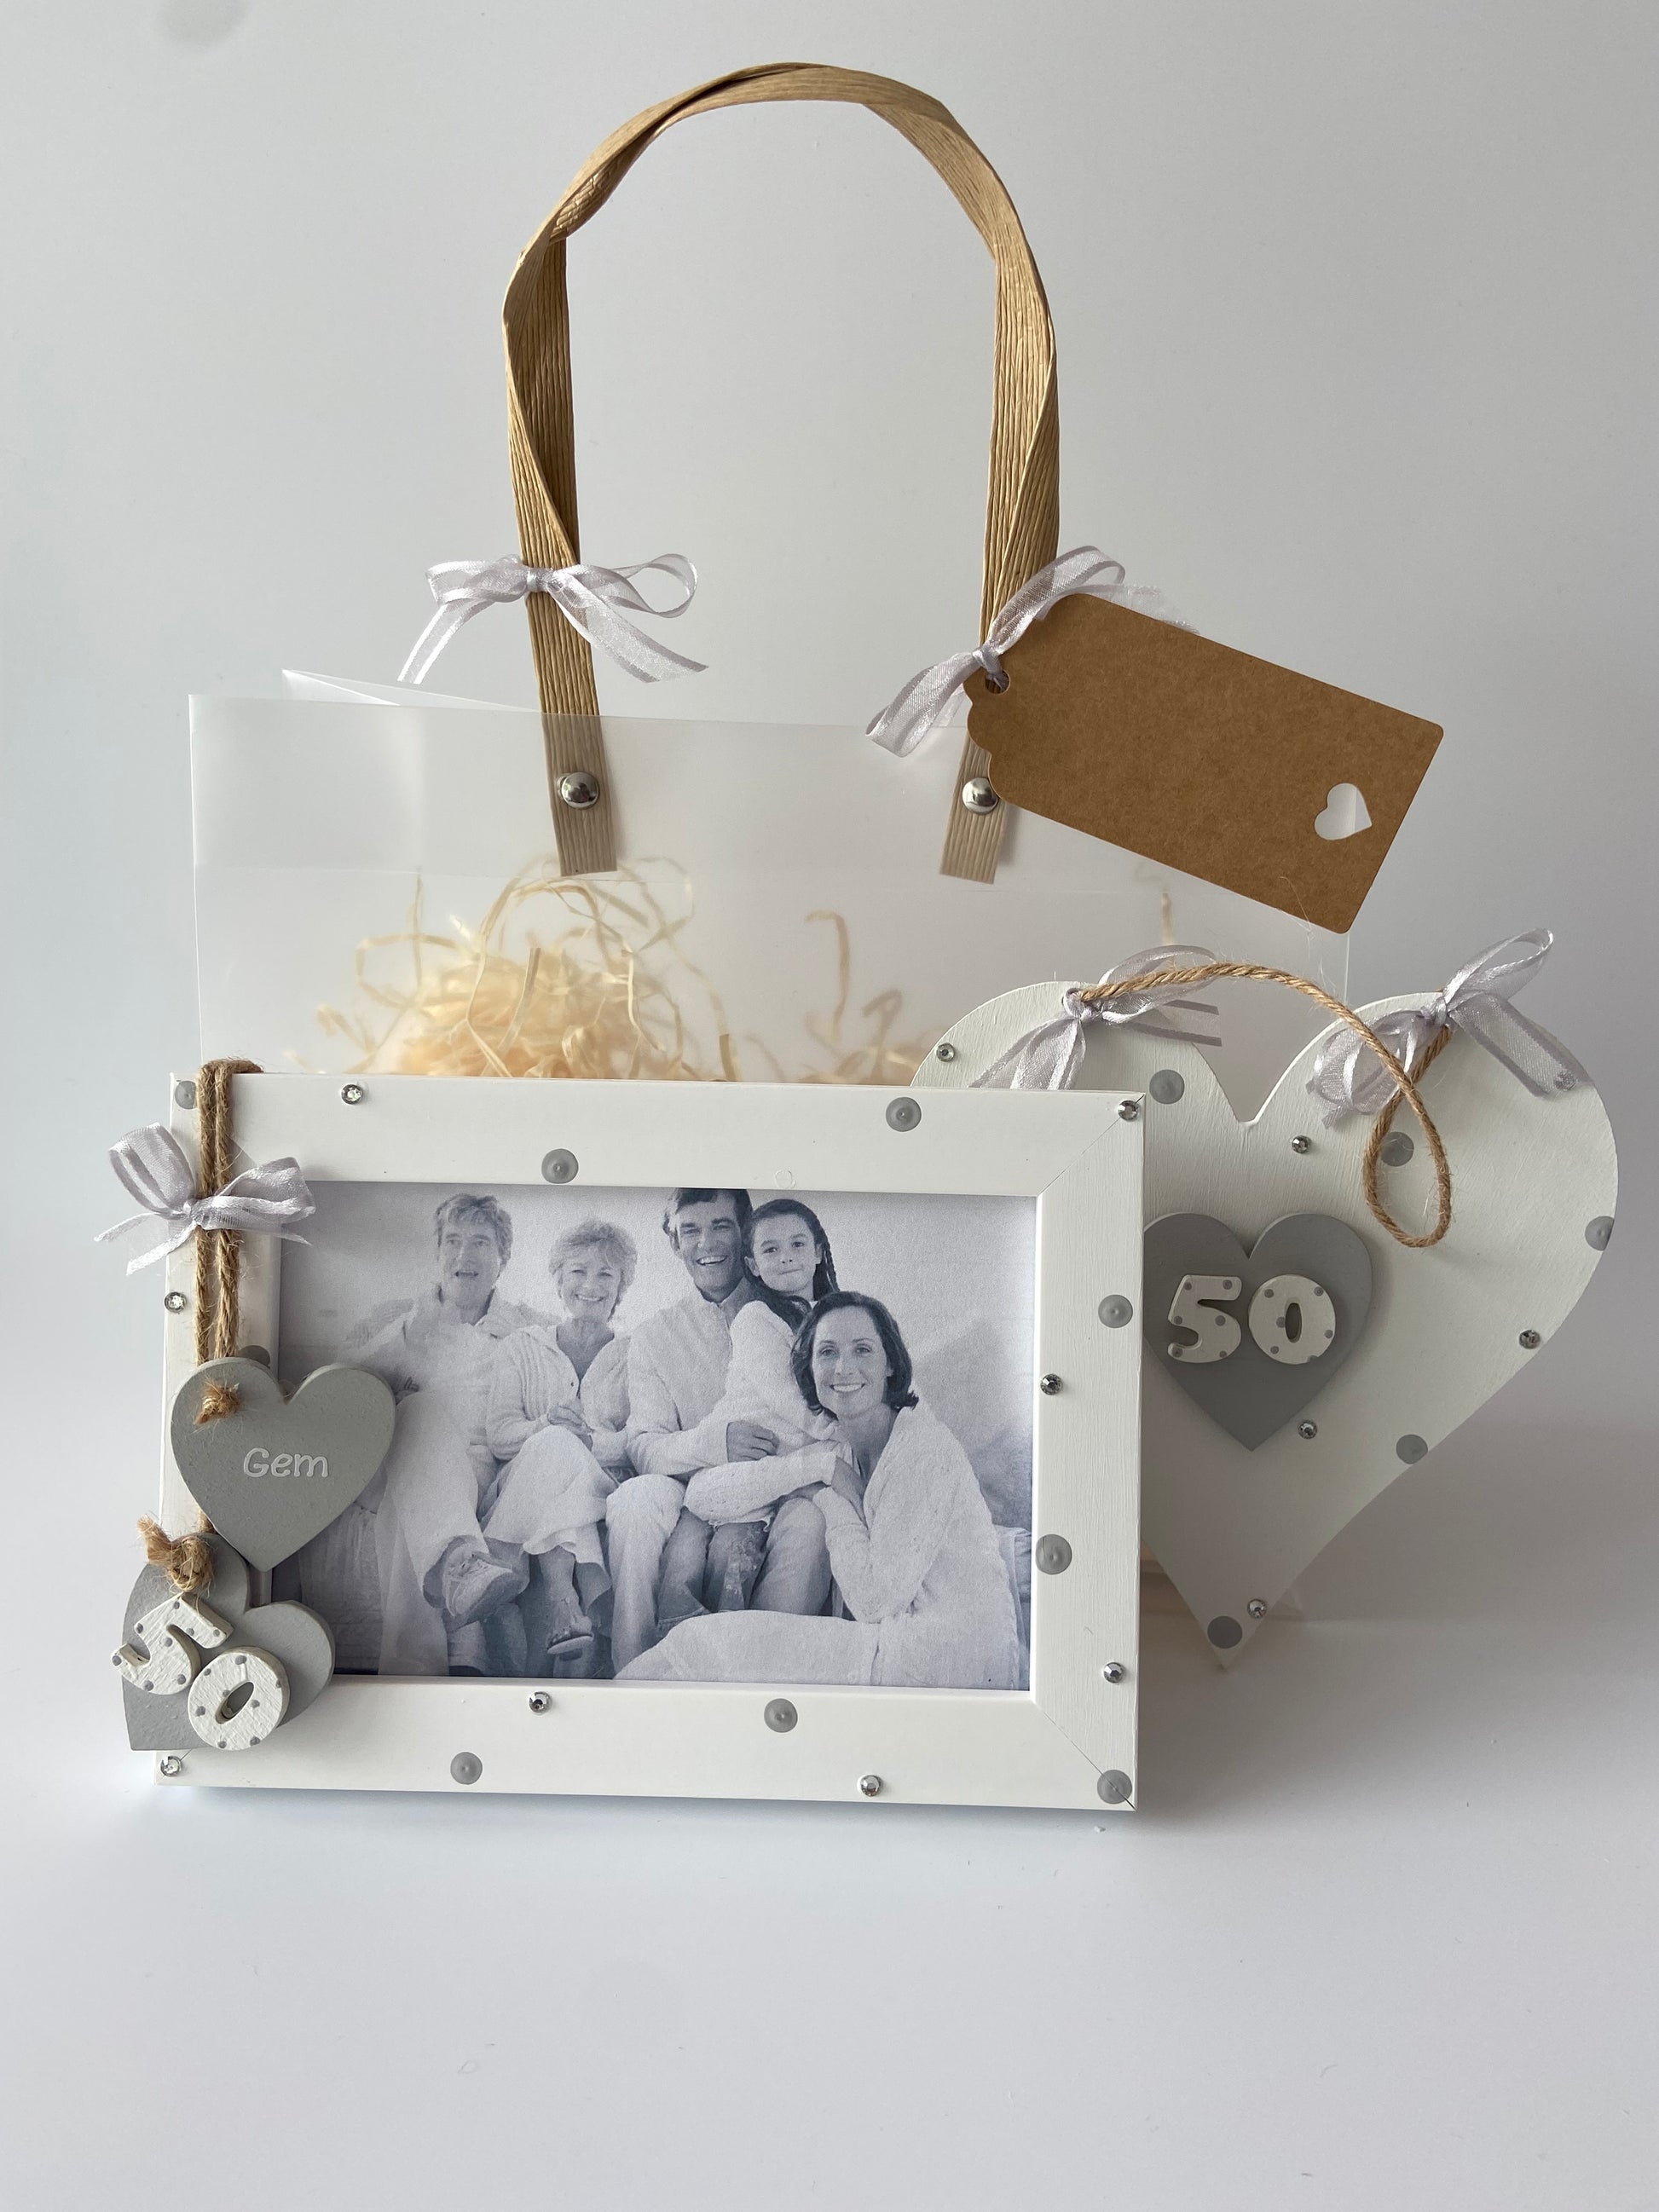 Image shows 50th birthday gift set including a photo frame and plaque. Decorated with polka dots, gems and ribbon. Also comes with photo of your choice and gift wrap.